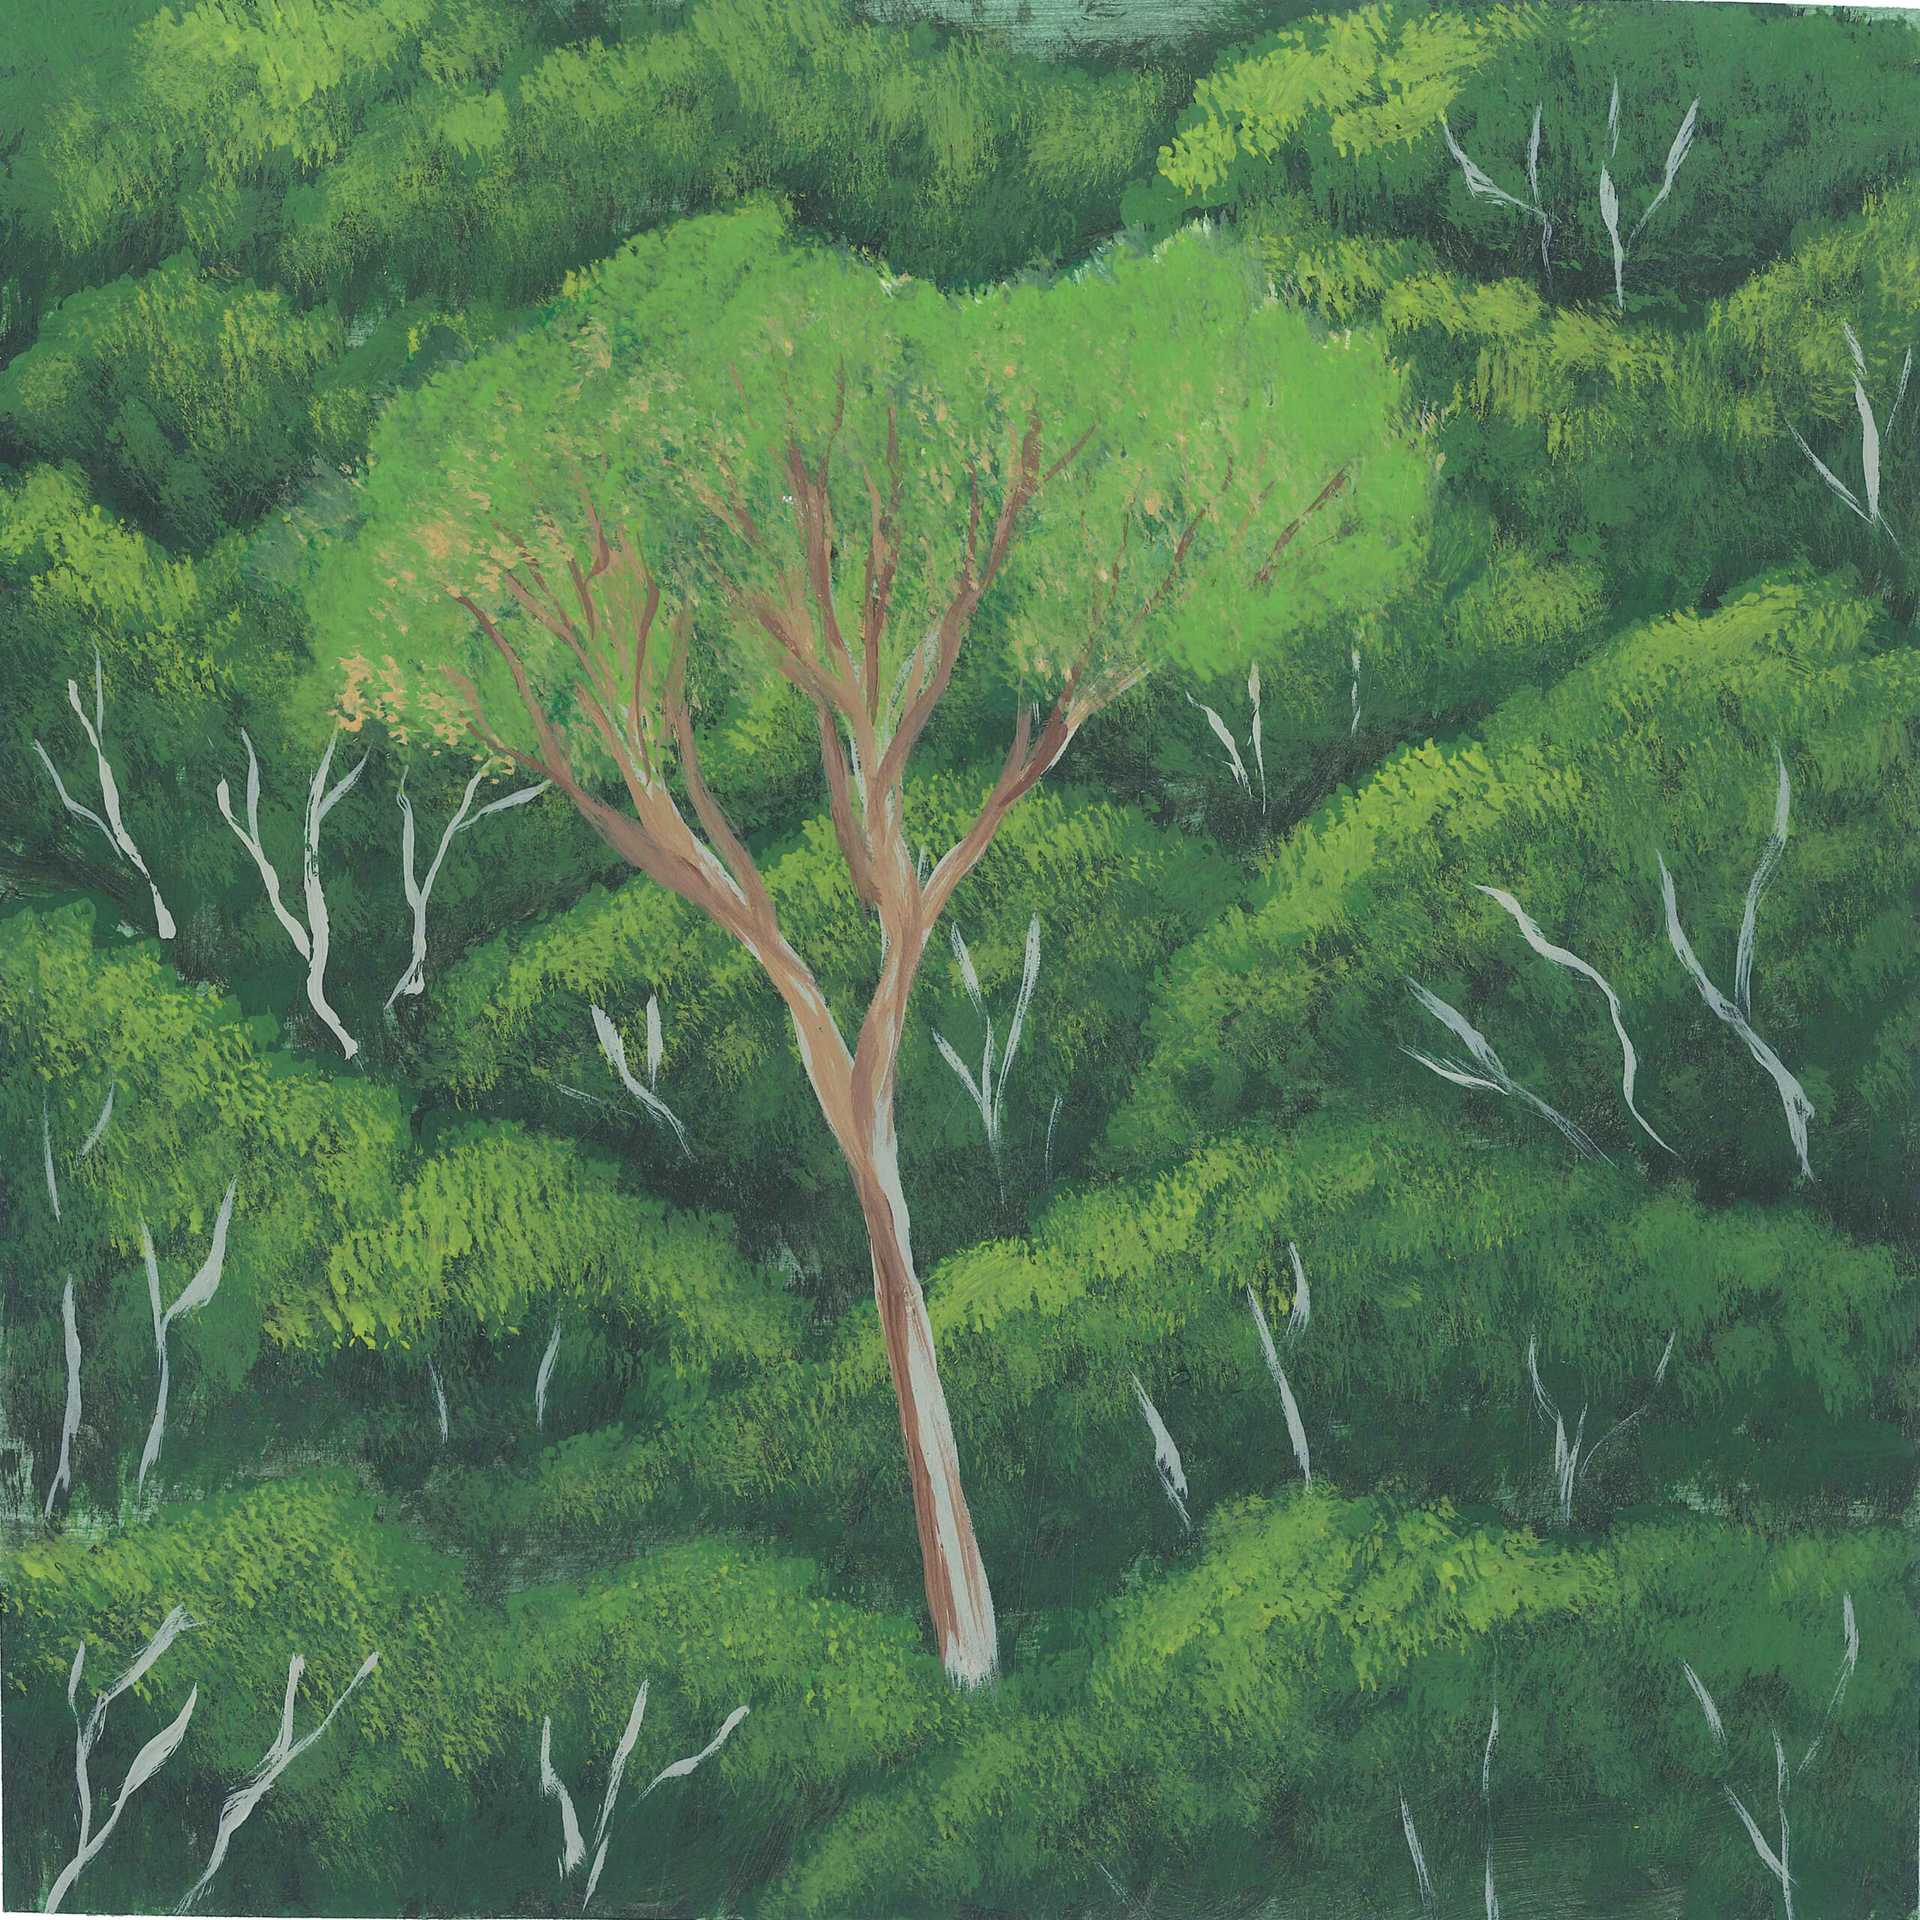 Sabalillo Reserve at Night - nature landscape painting - earth.fm